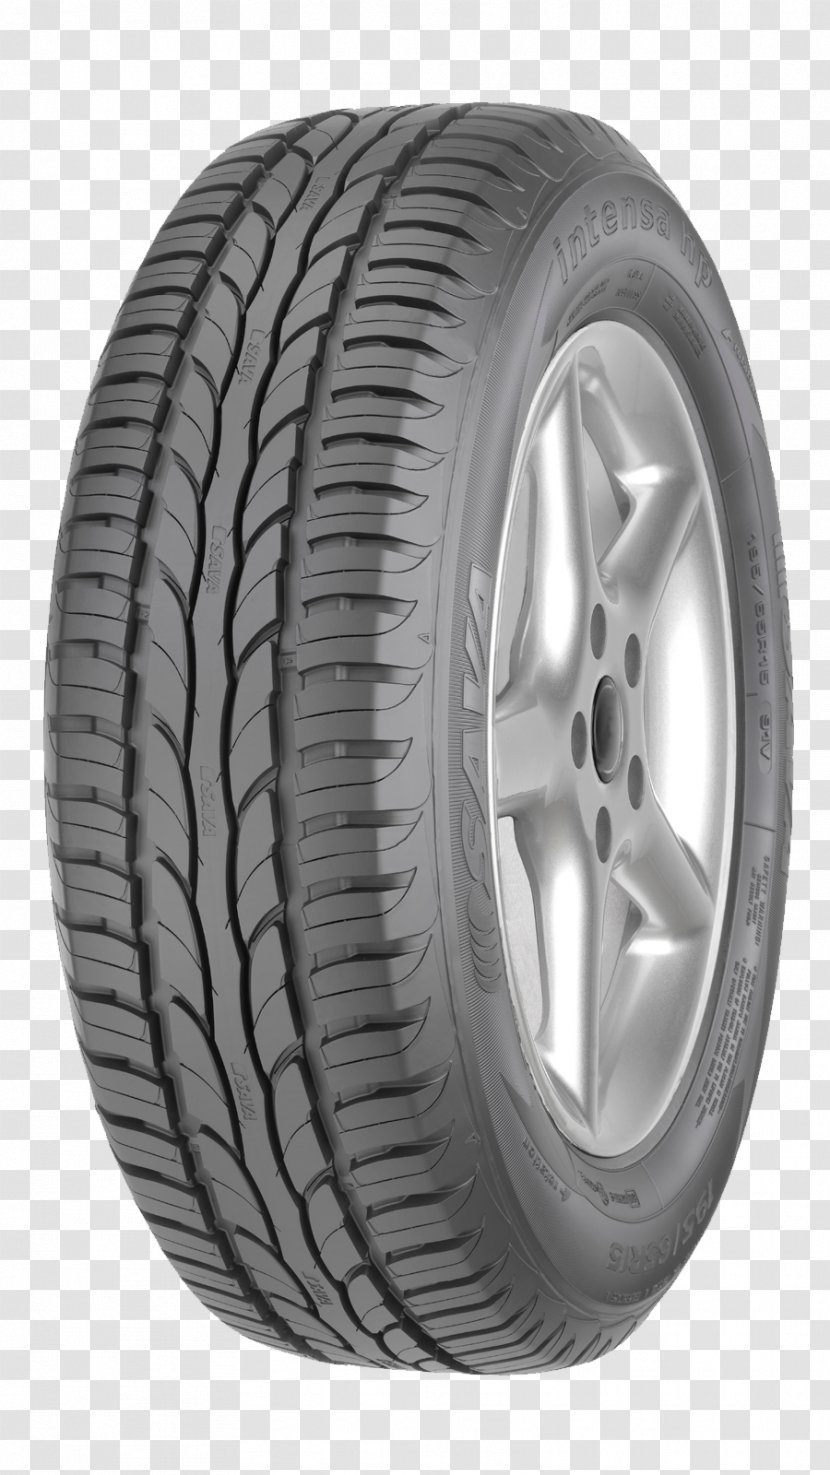 Tire Hewlett-Packard Sava Price Vehicle Category - Summer Label Transparent PNG